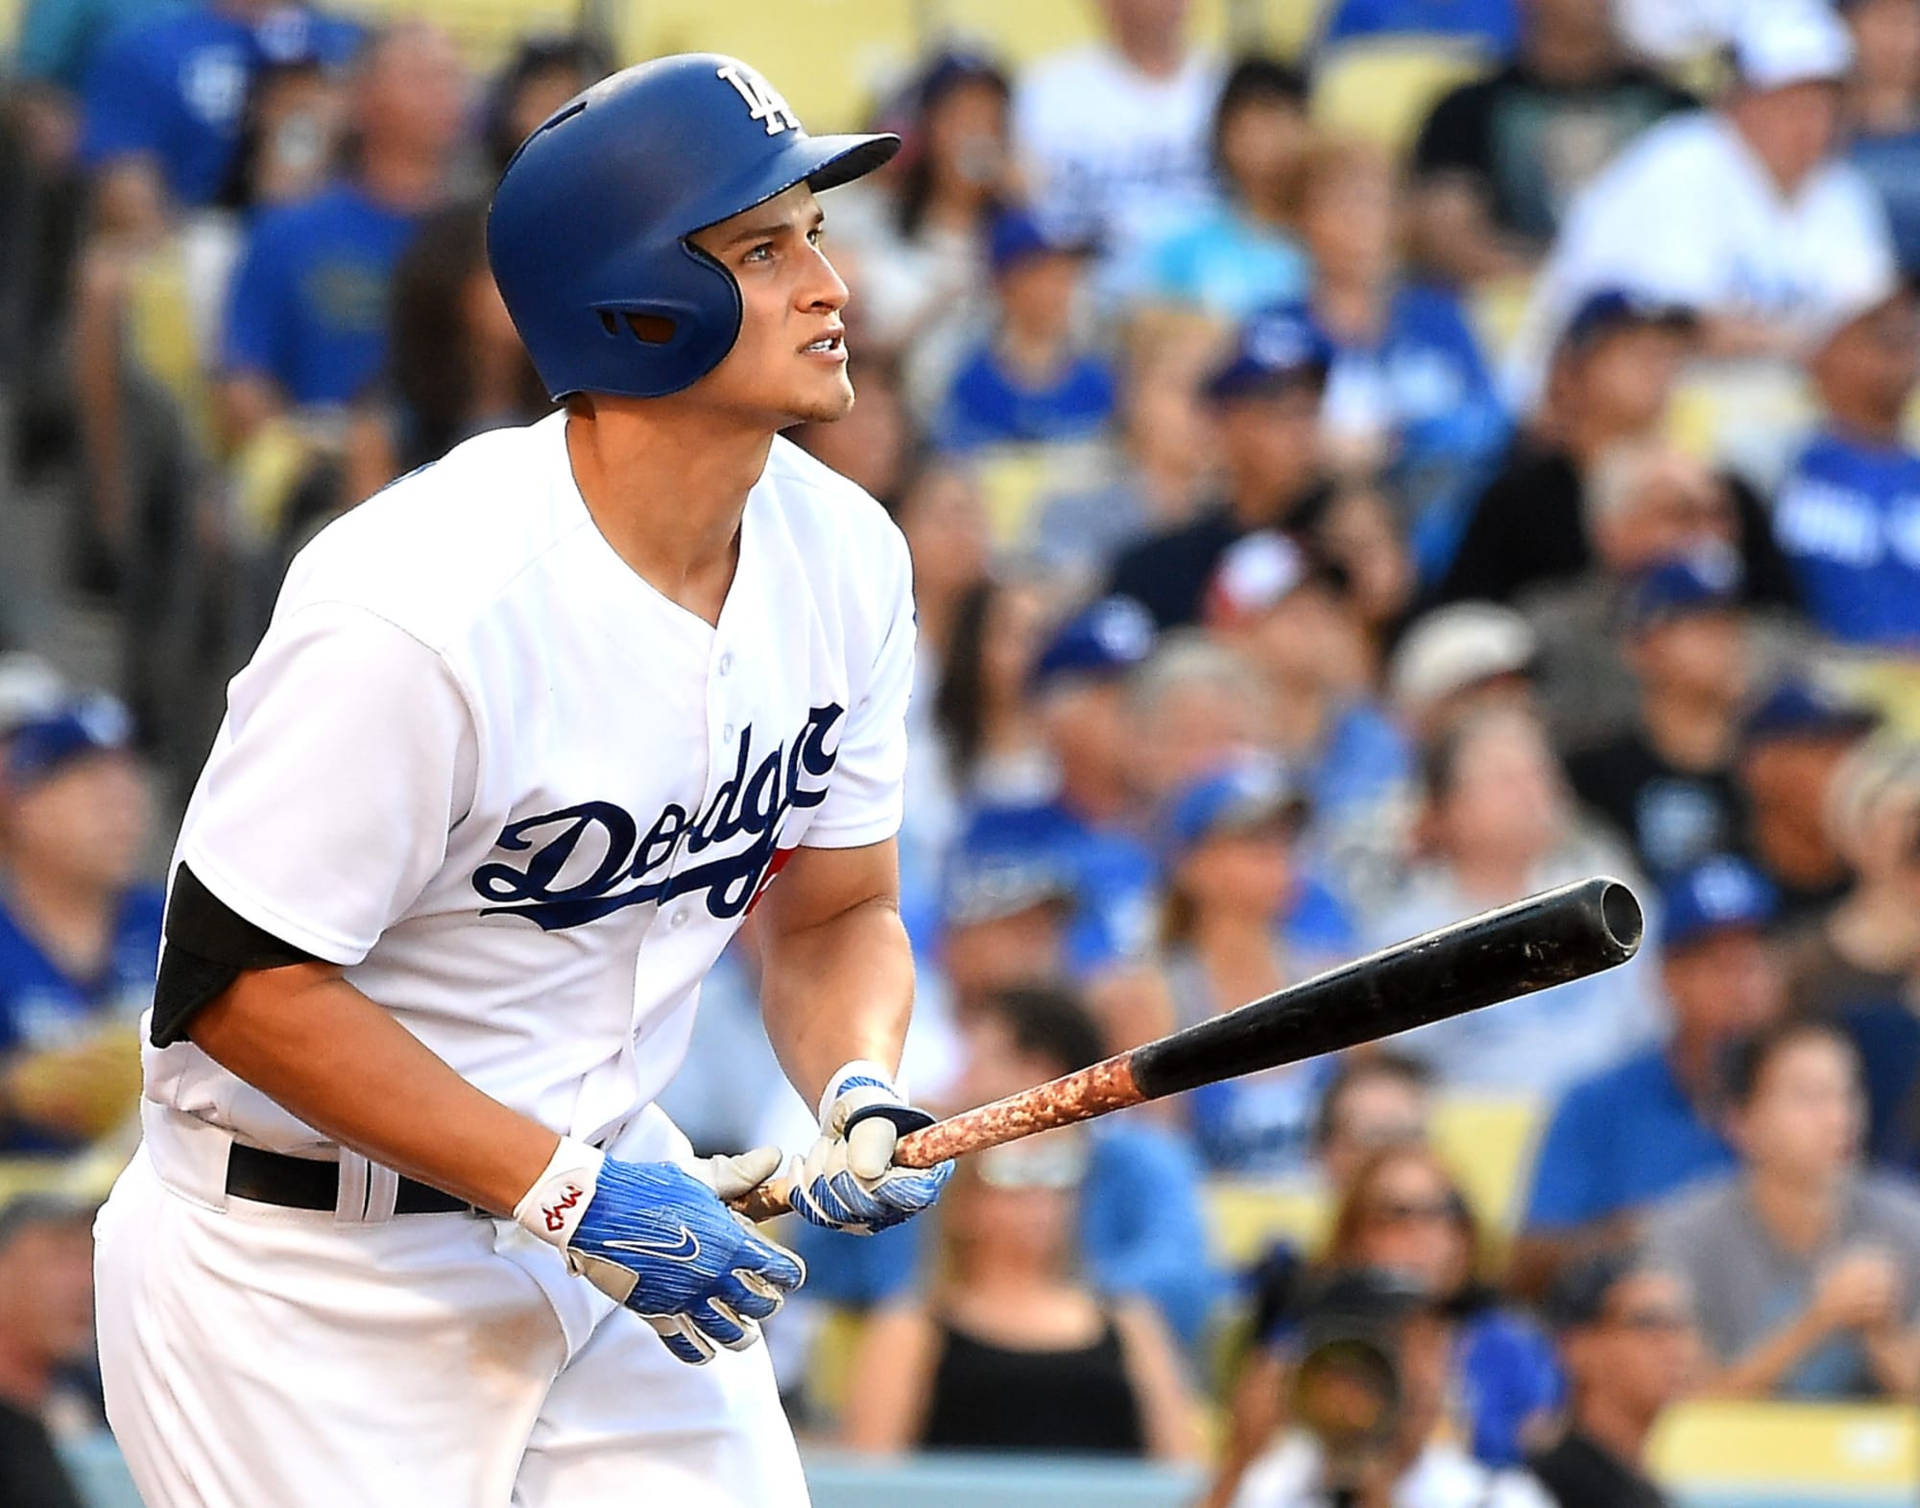 Corey Seager Holding Bat In Front Of Fans Background